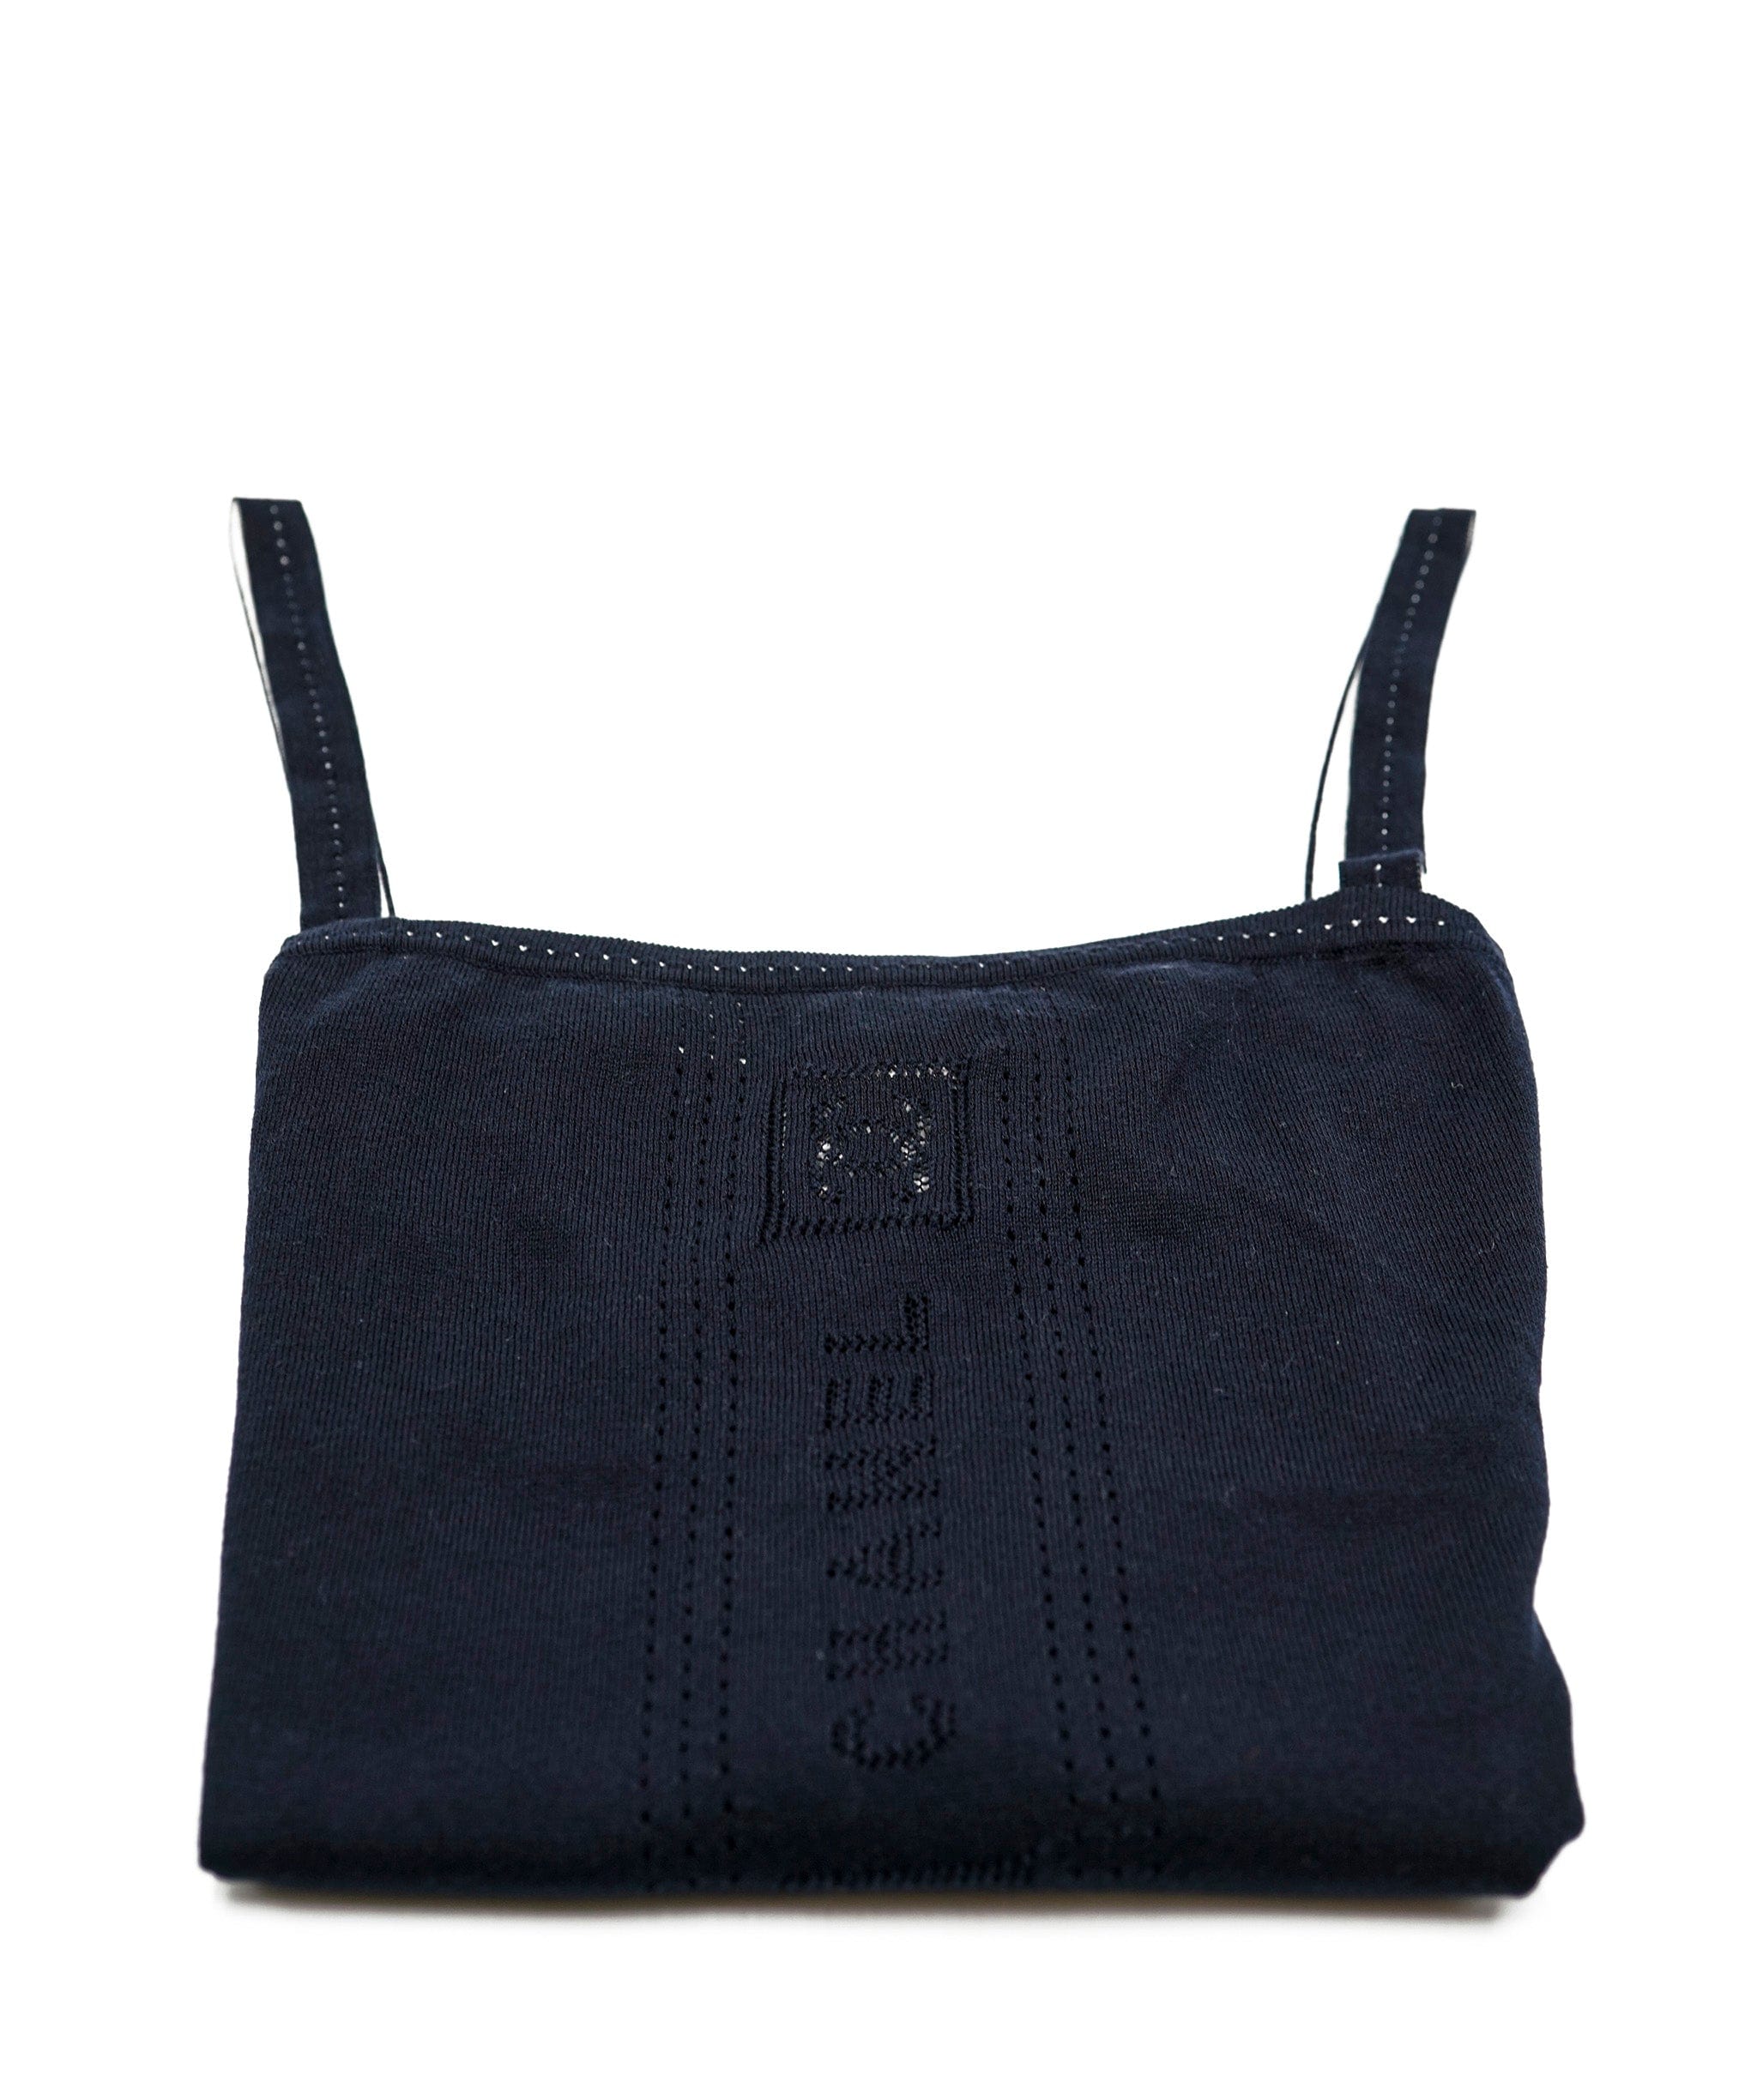 Chanel Chanel Sport Punching Logo Camisole Navy ASL5033